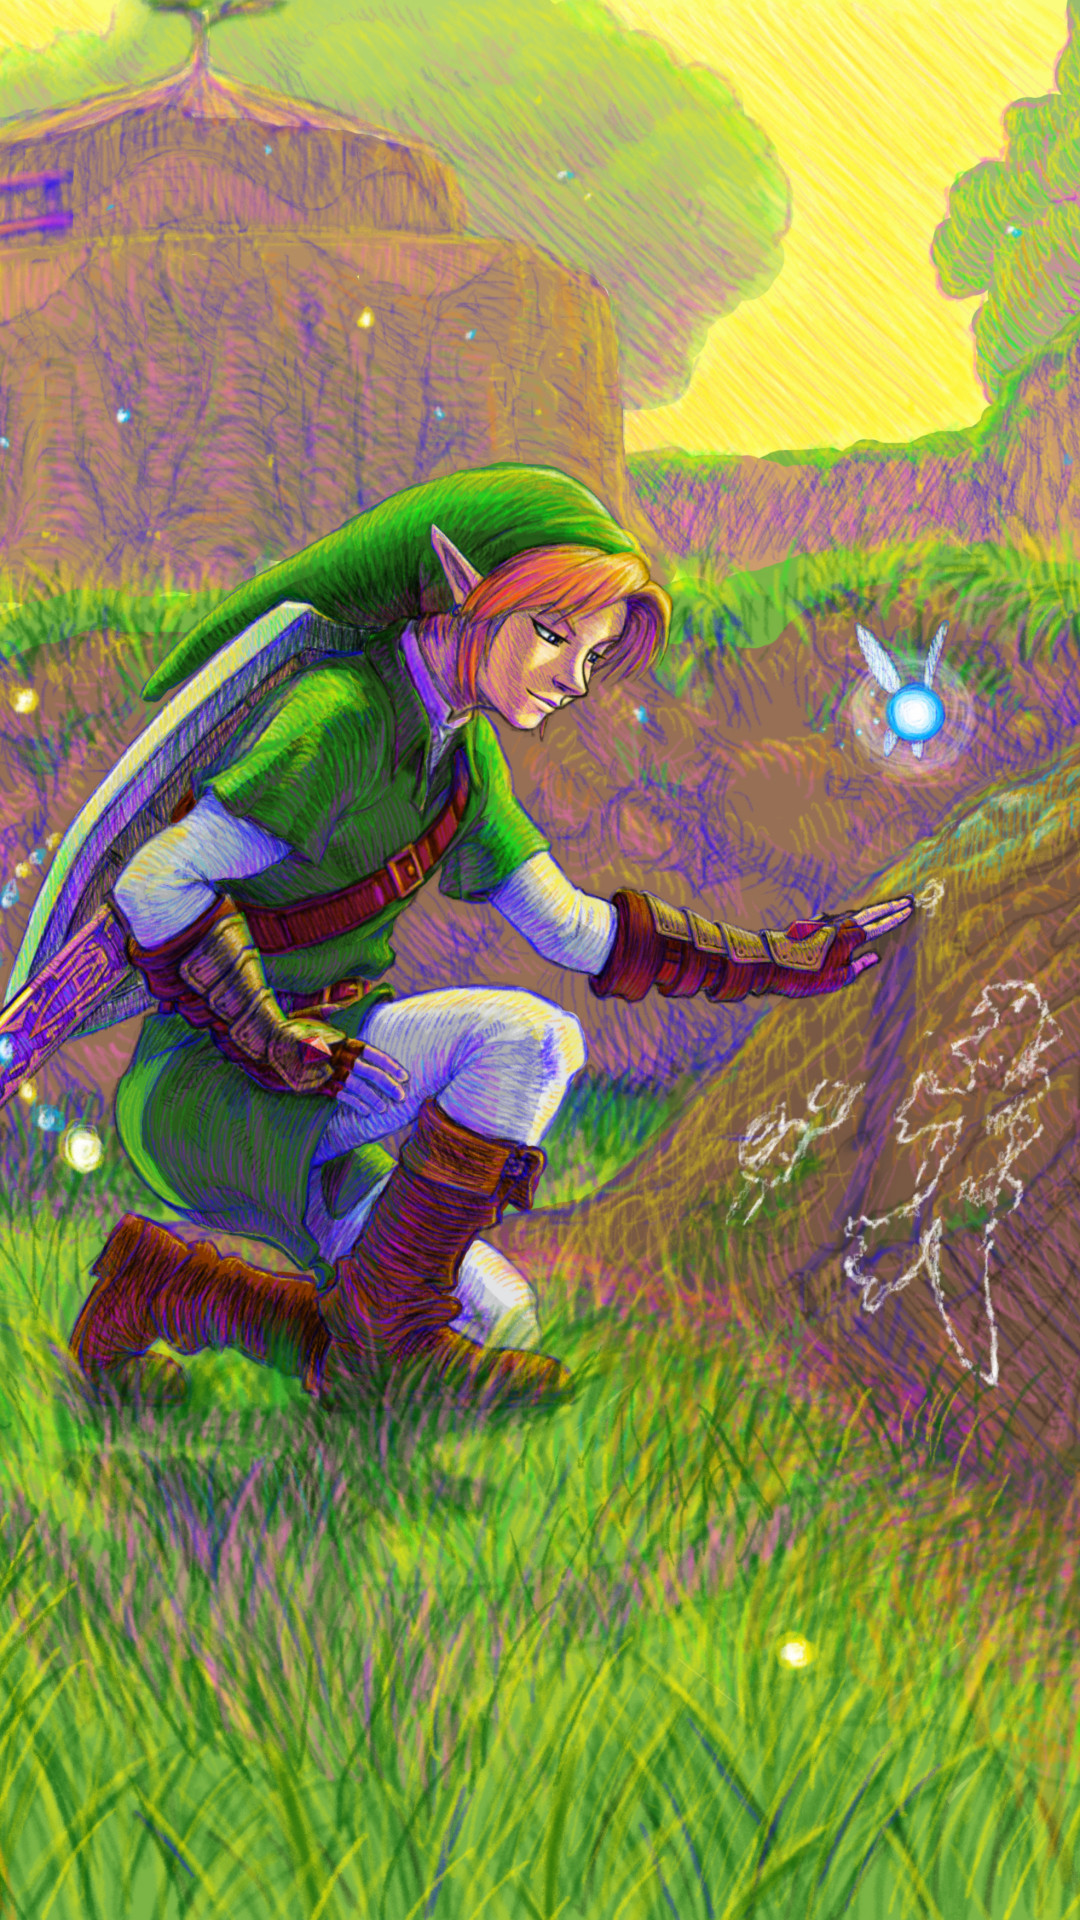 ocarina of time wallpaper,grass,illustration,painting,fictional character,plant